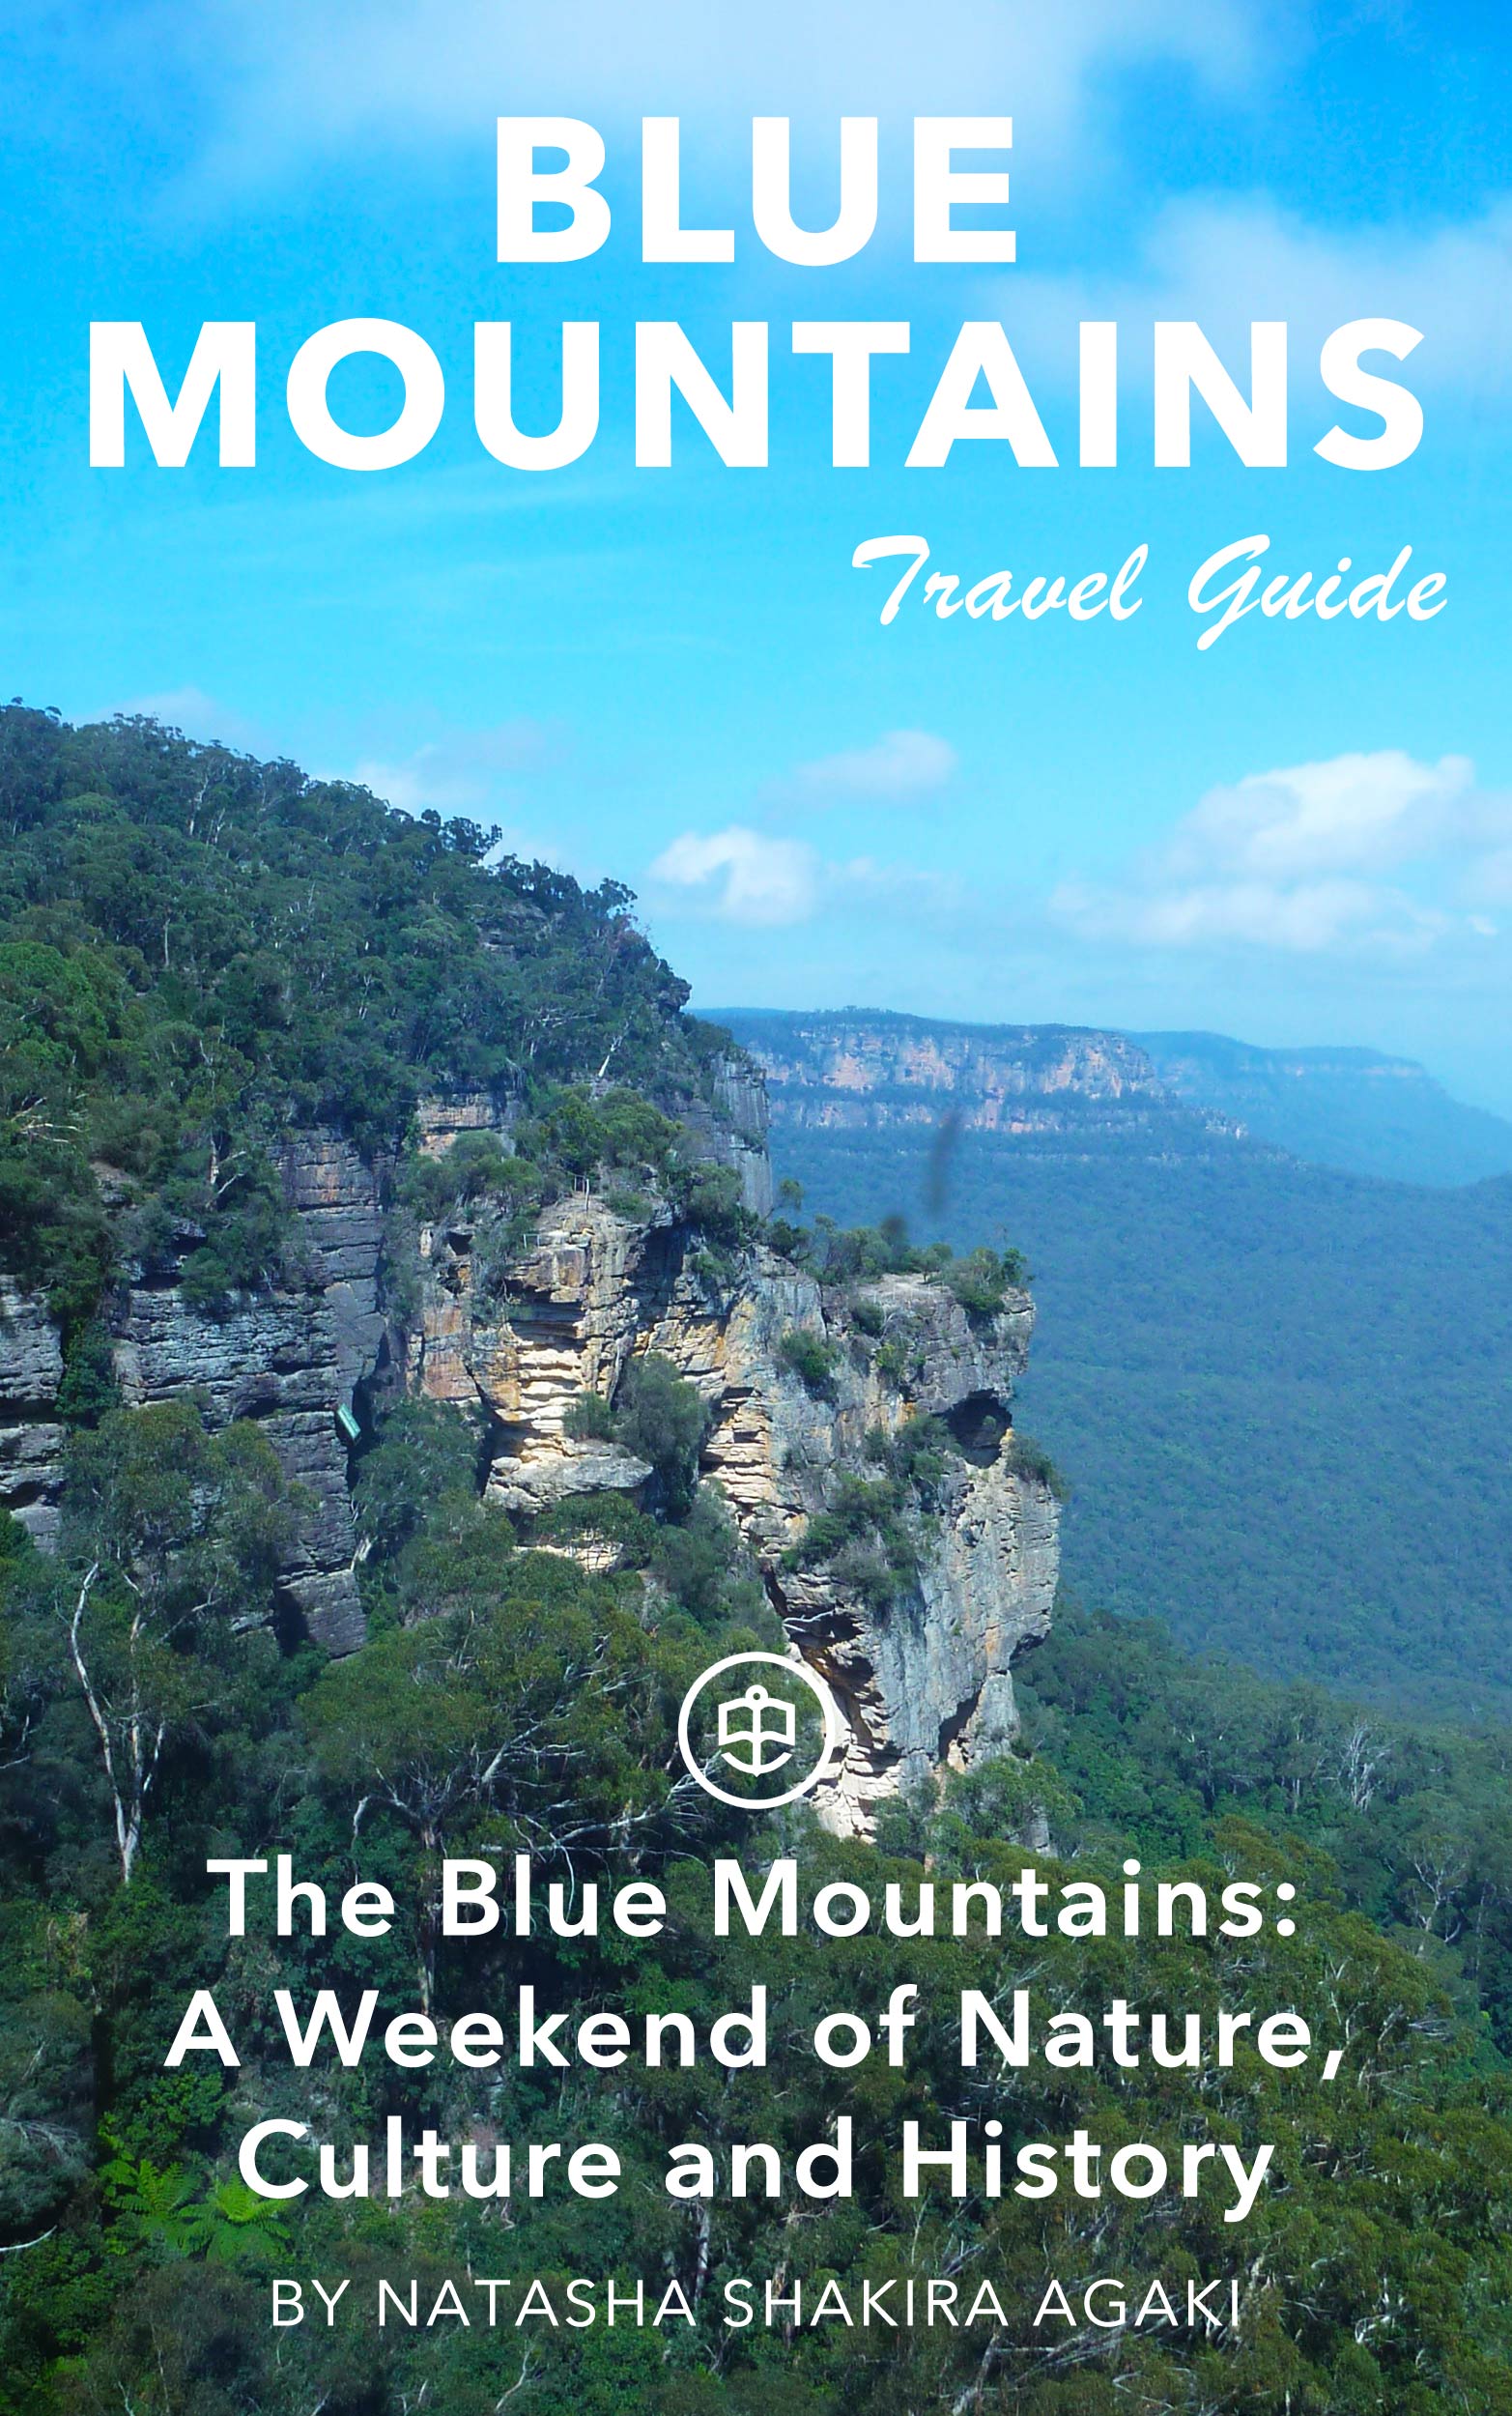 The Blue Mountains: A weekend of nature, culture and history.